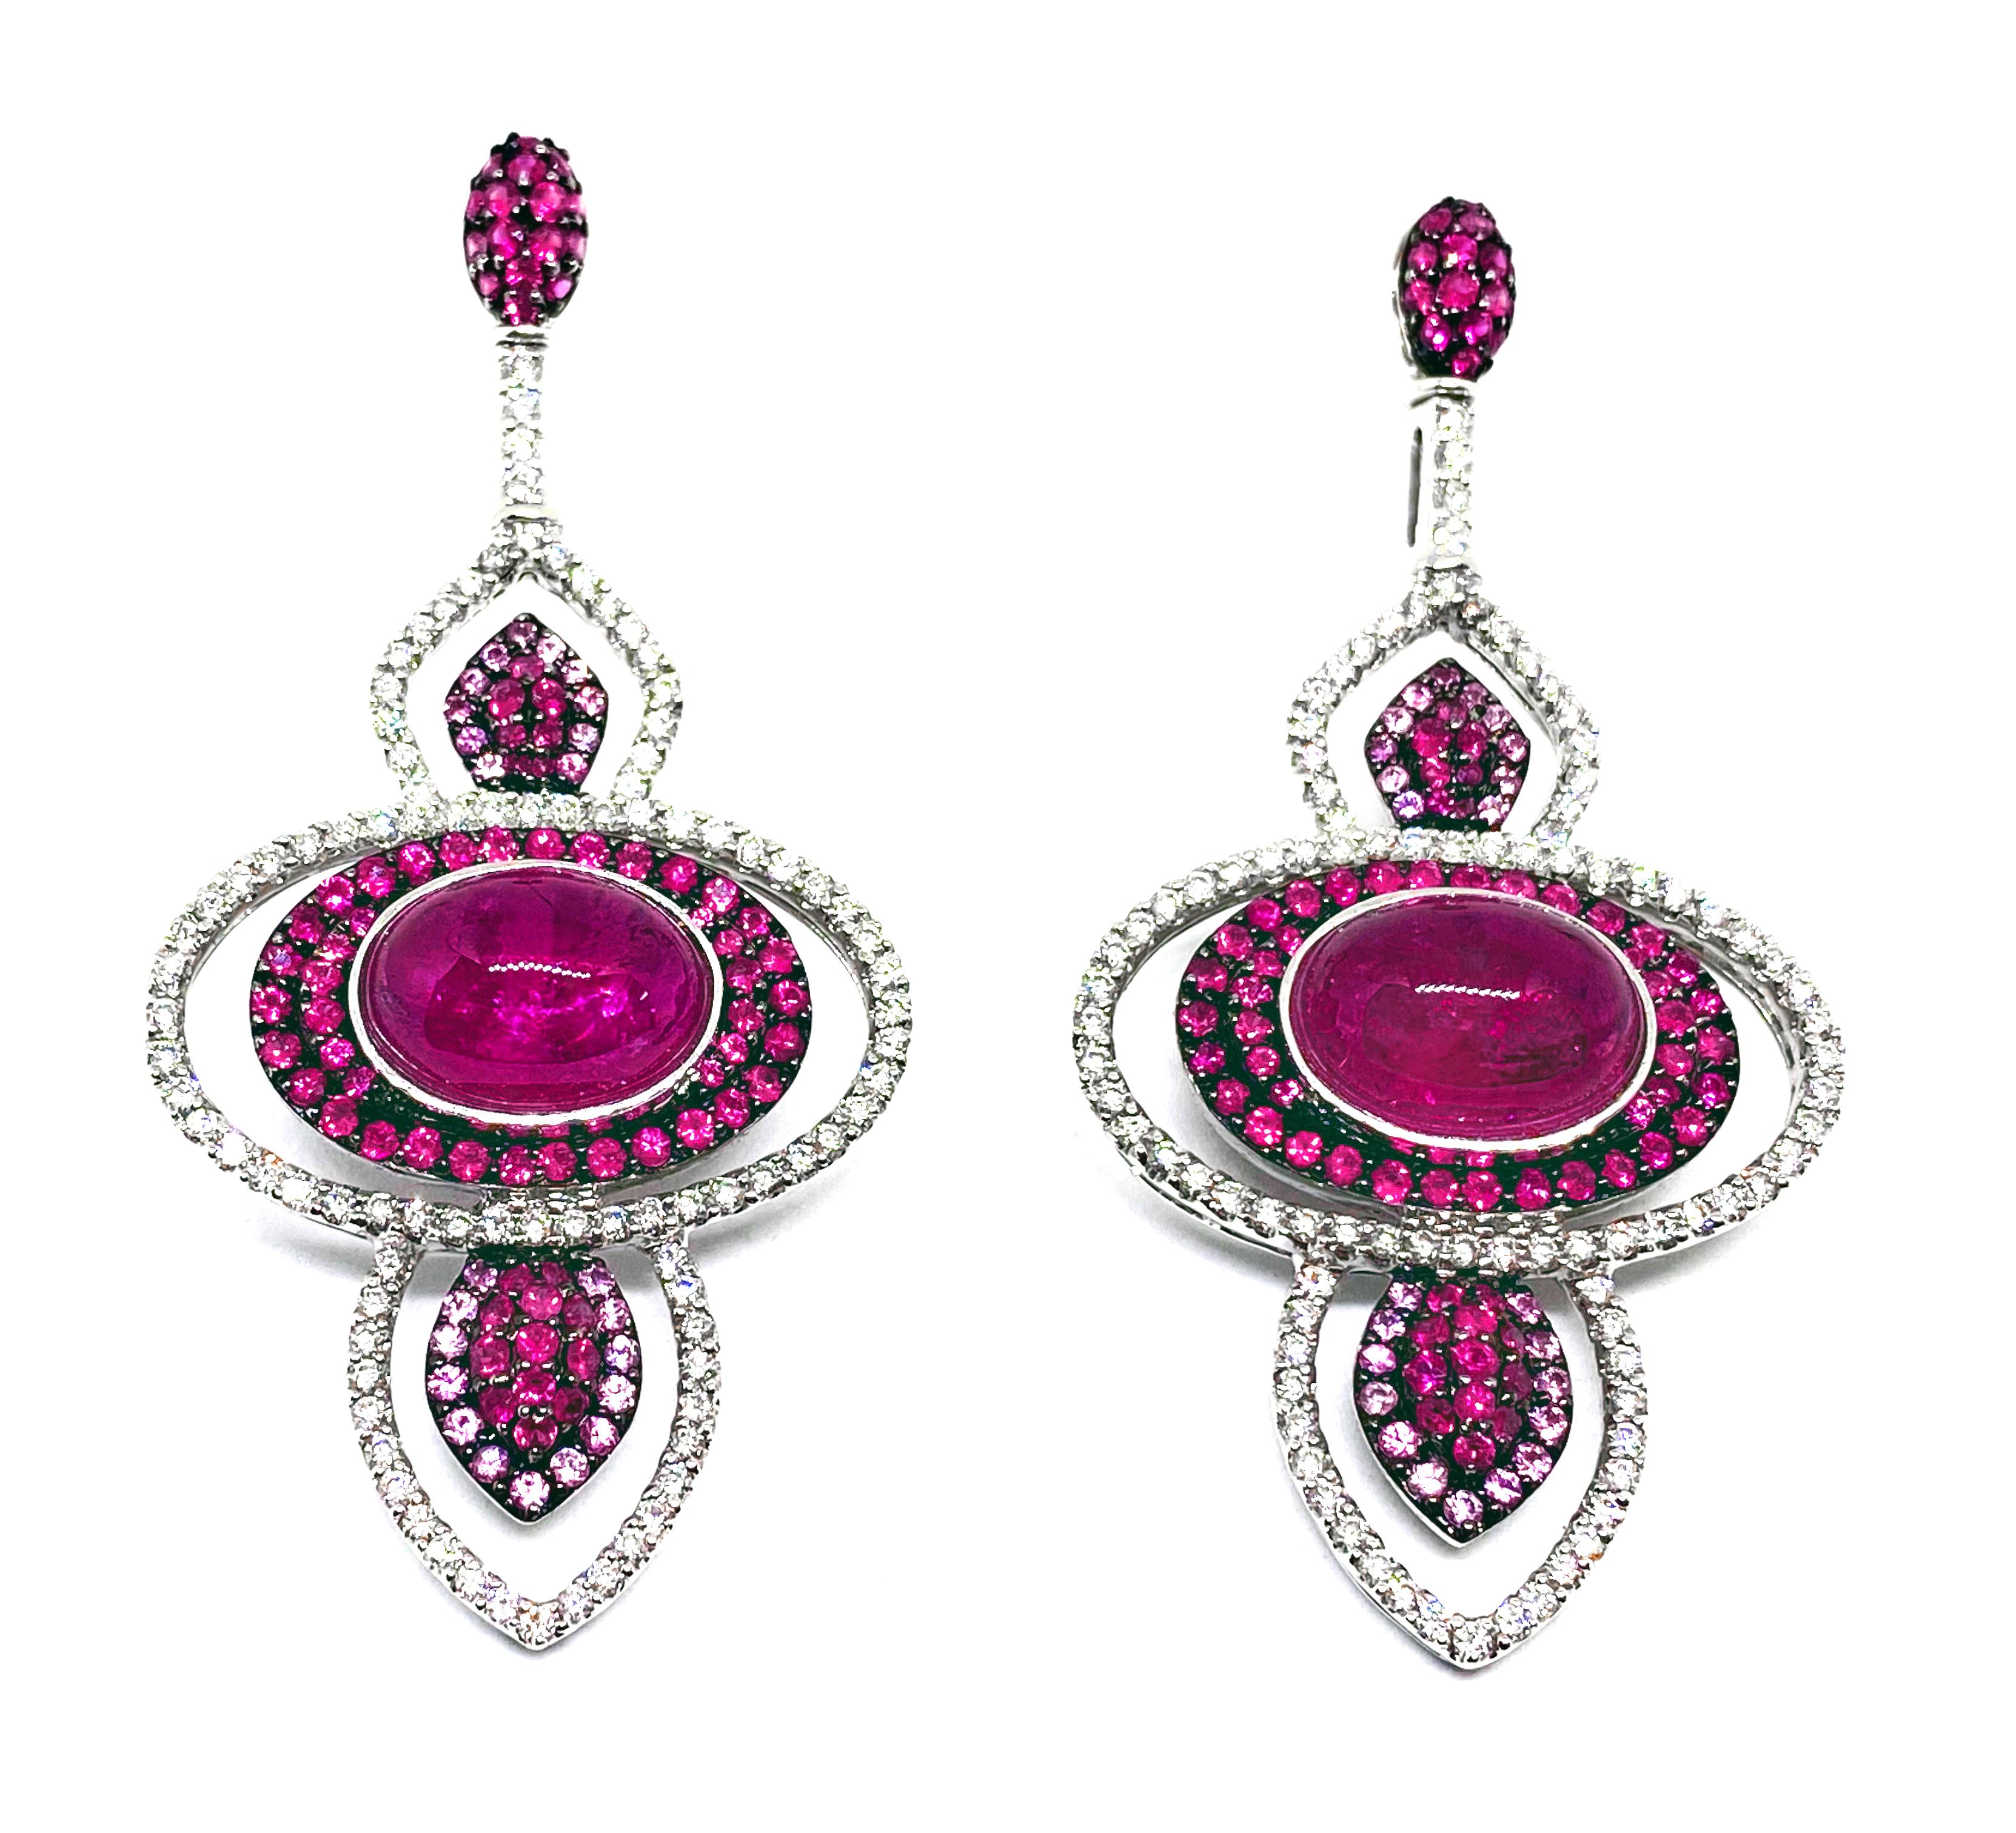 Certified 18 Kt White Gold earrings  with 3 ct diamonds, 5,69 ct ruby and pink sapphire and  17.35 ct central  cabochon tourmaline, exquisitely curated to captivate a sensuous palette of reds set with fine white diamonds.  The back is artfully